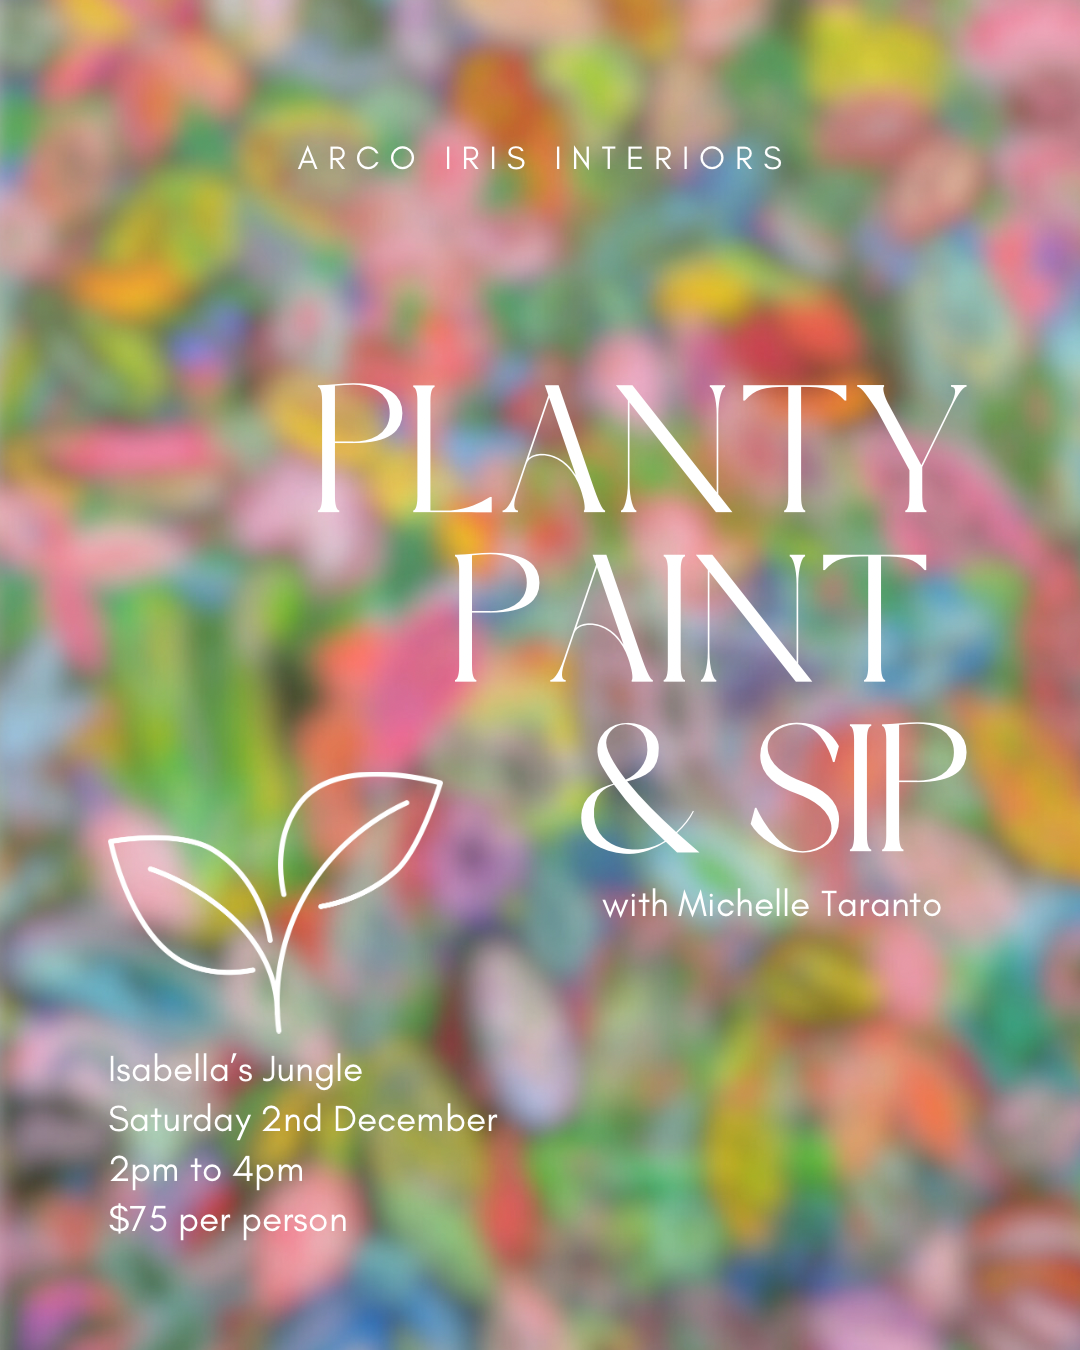 Planty Paint & Sip - 2nd December - Isabella’s Jungle